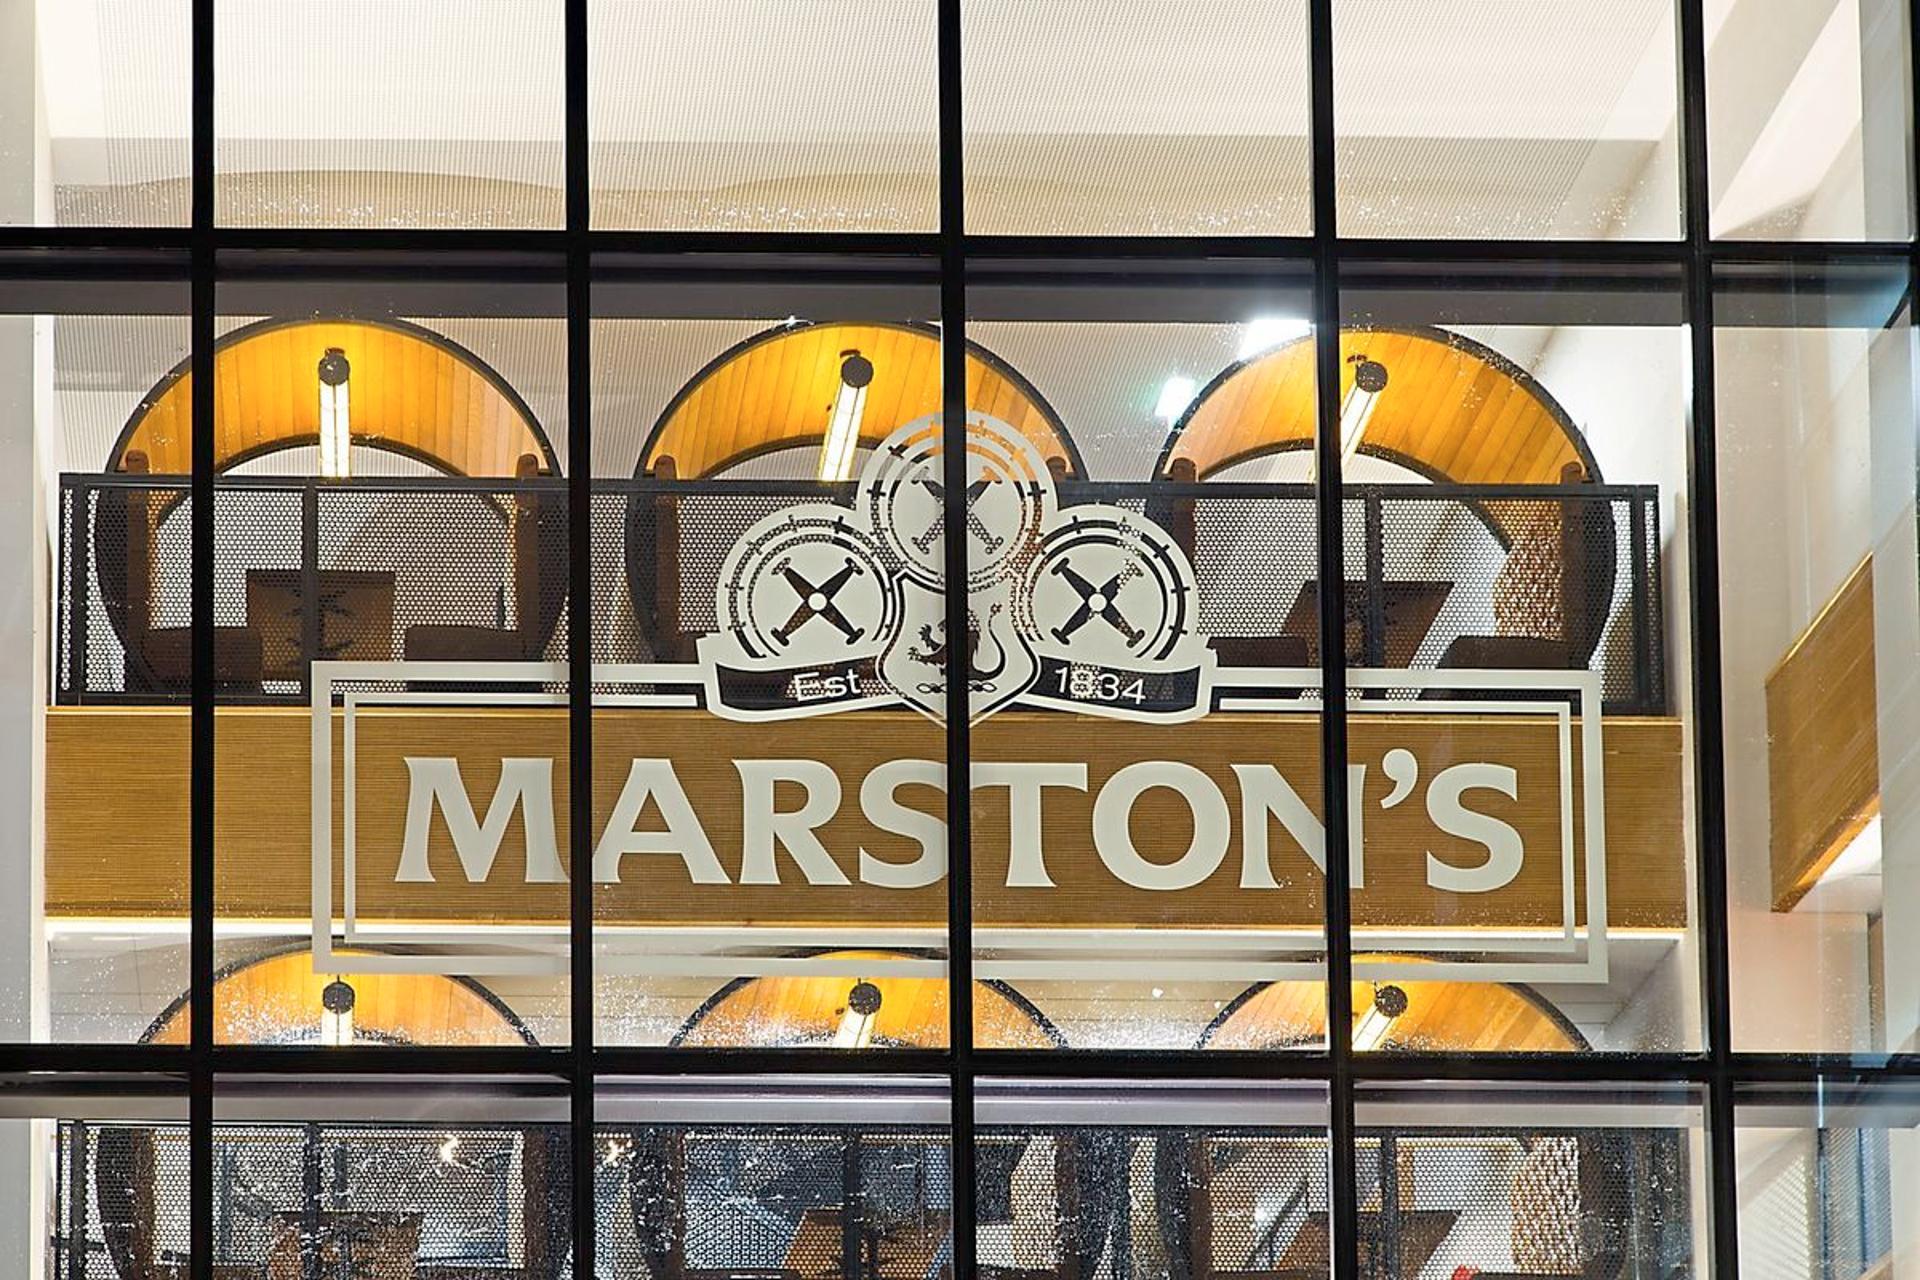 Marston’s considering sale of up to 50 non-core pubs